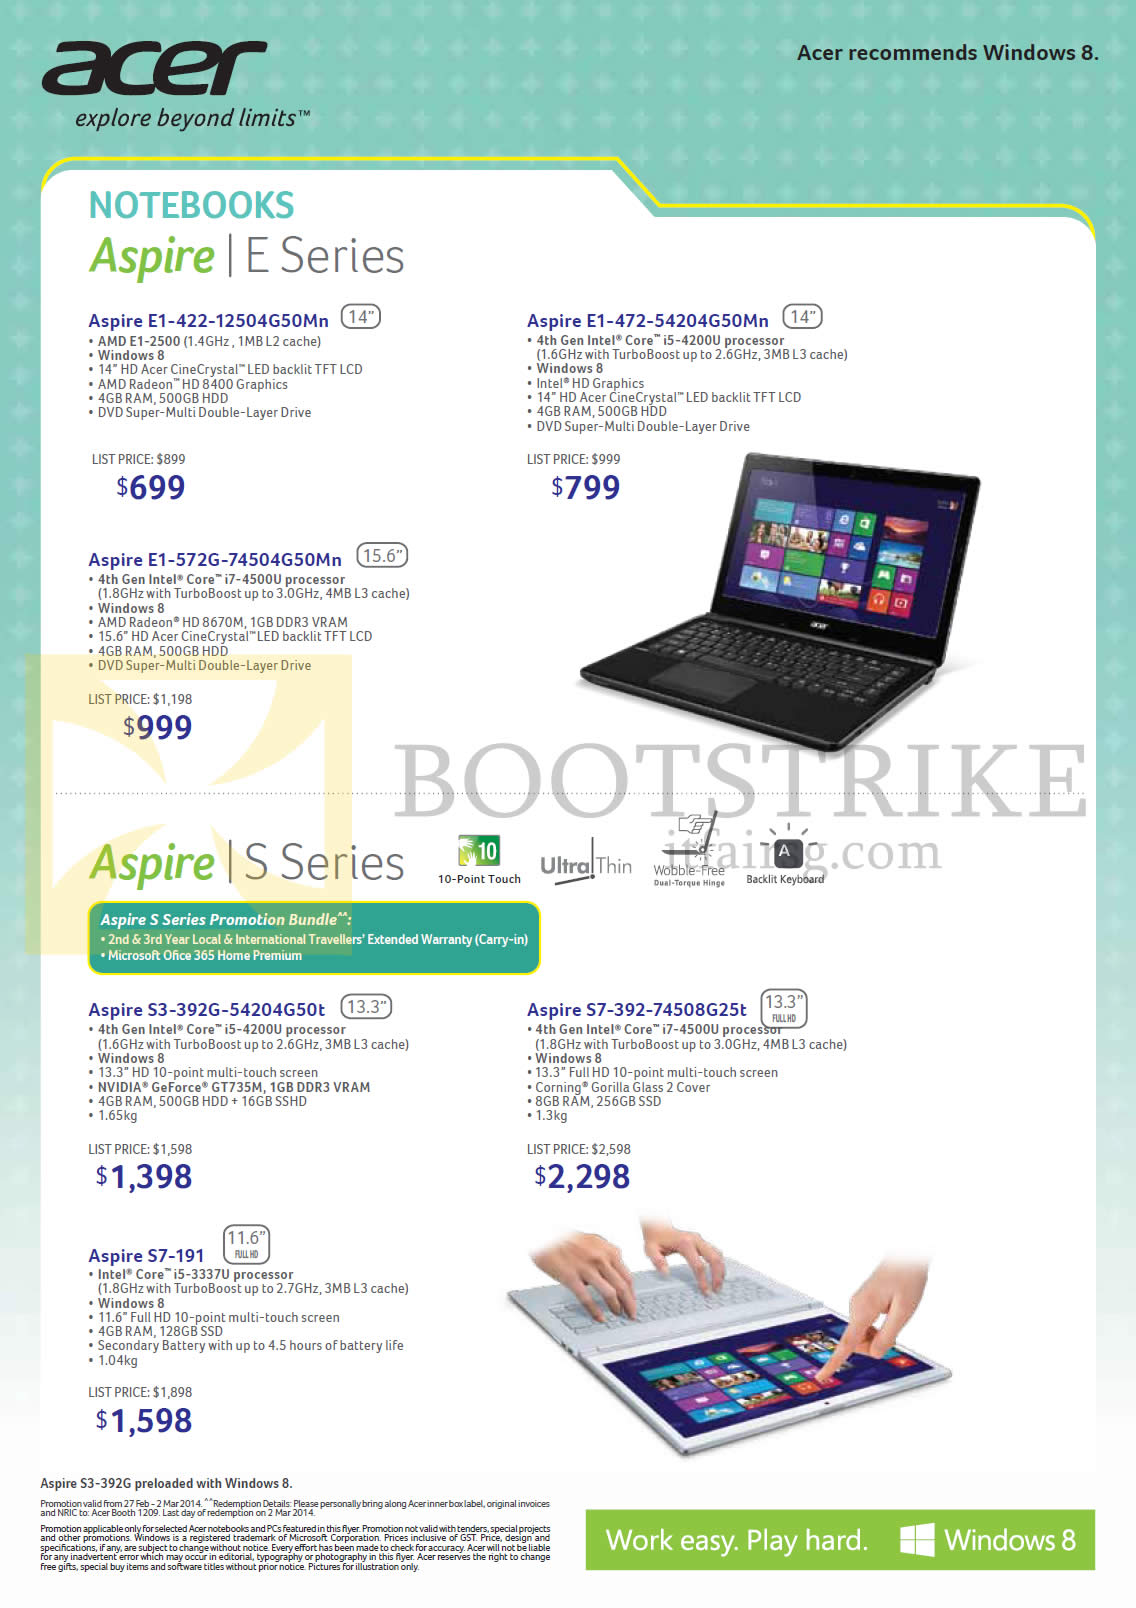 IT SHOW 2014 price list image brochure of Acer Notebooks Aspire E1-422, 472, 572G, S3-392G, S7-392, S7-191